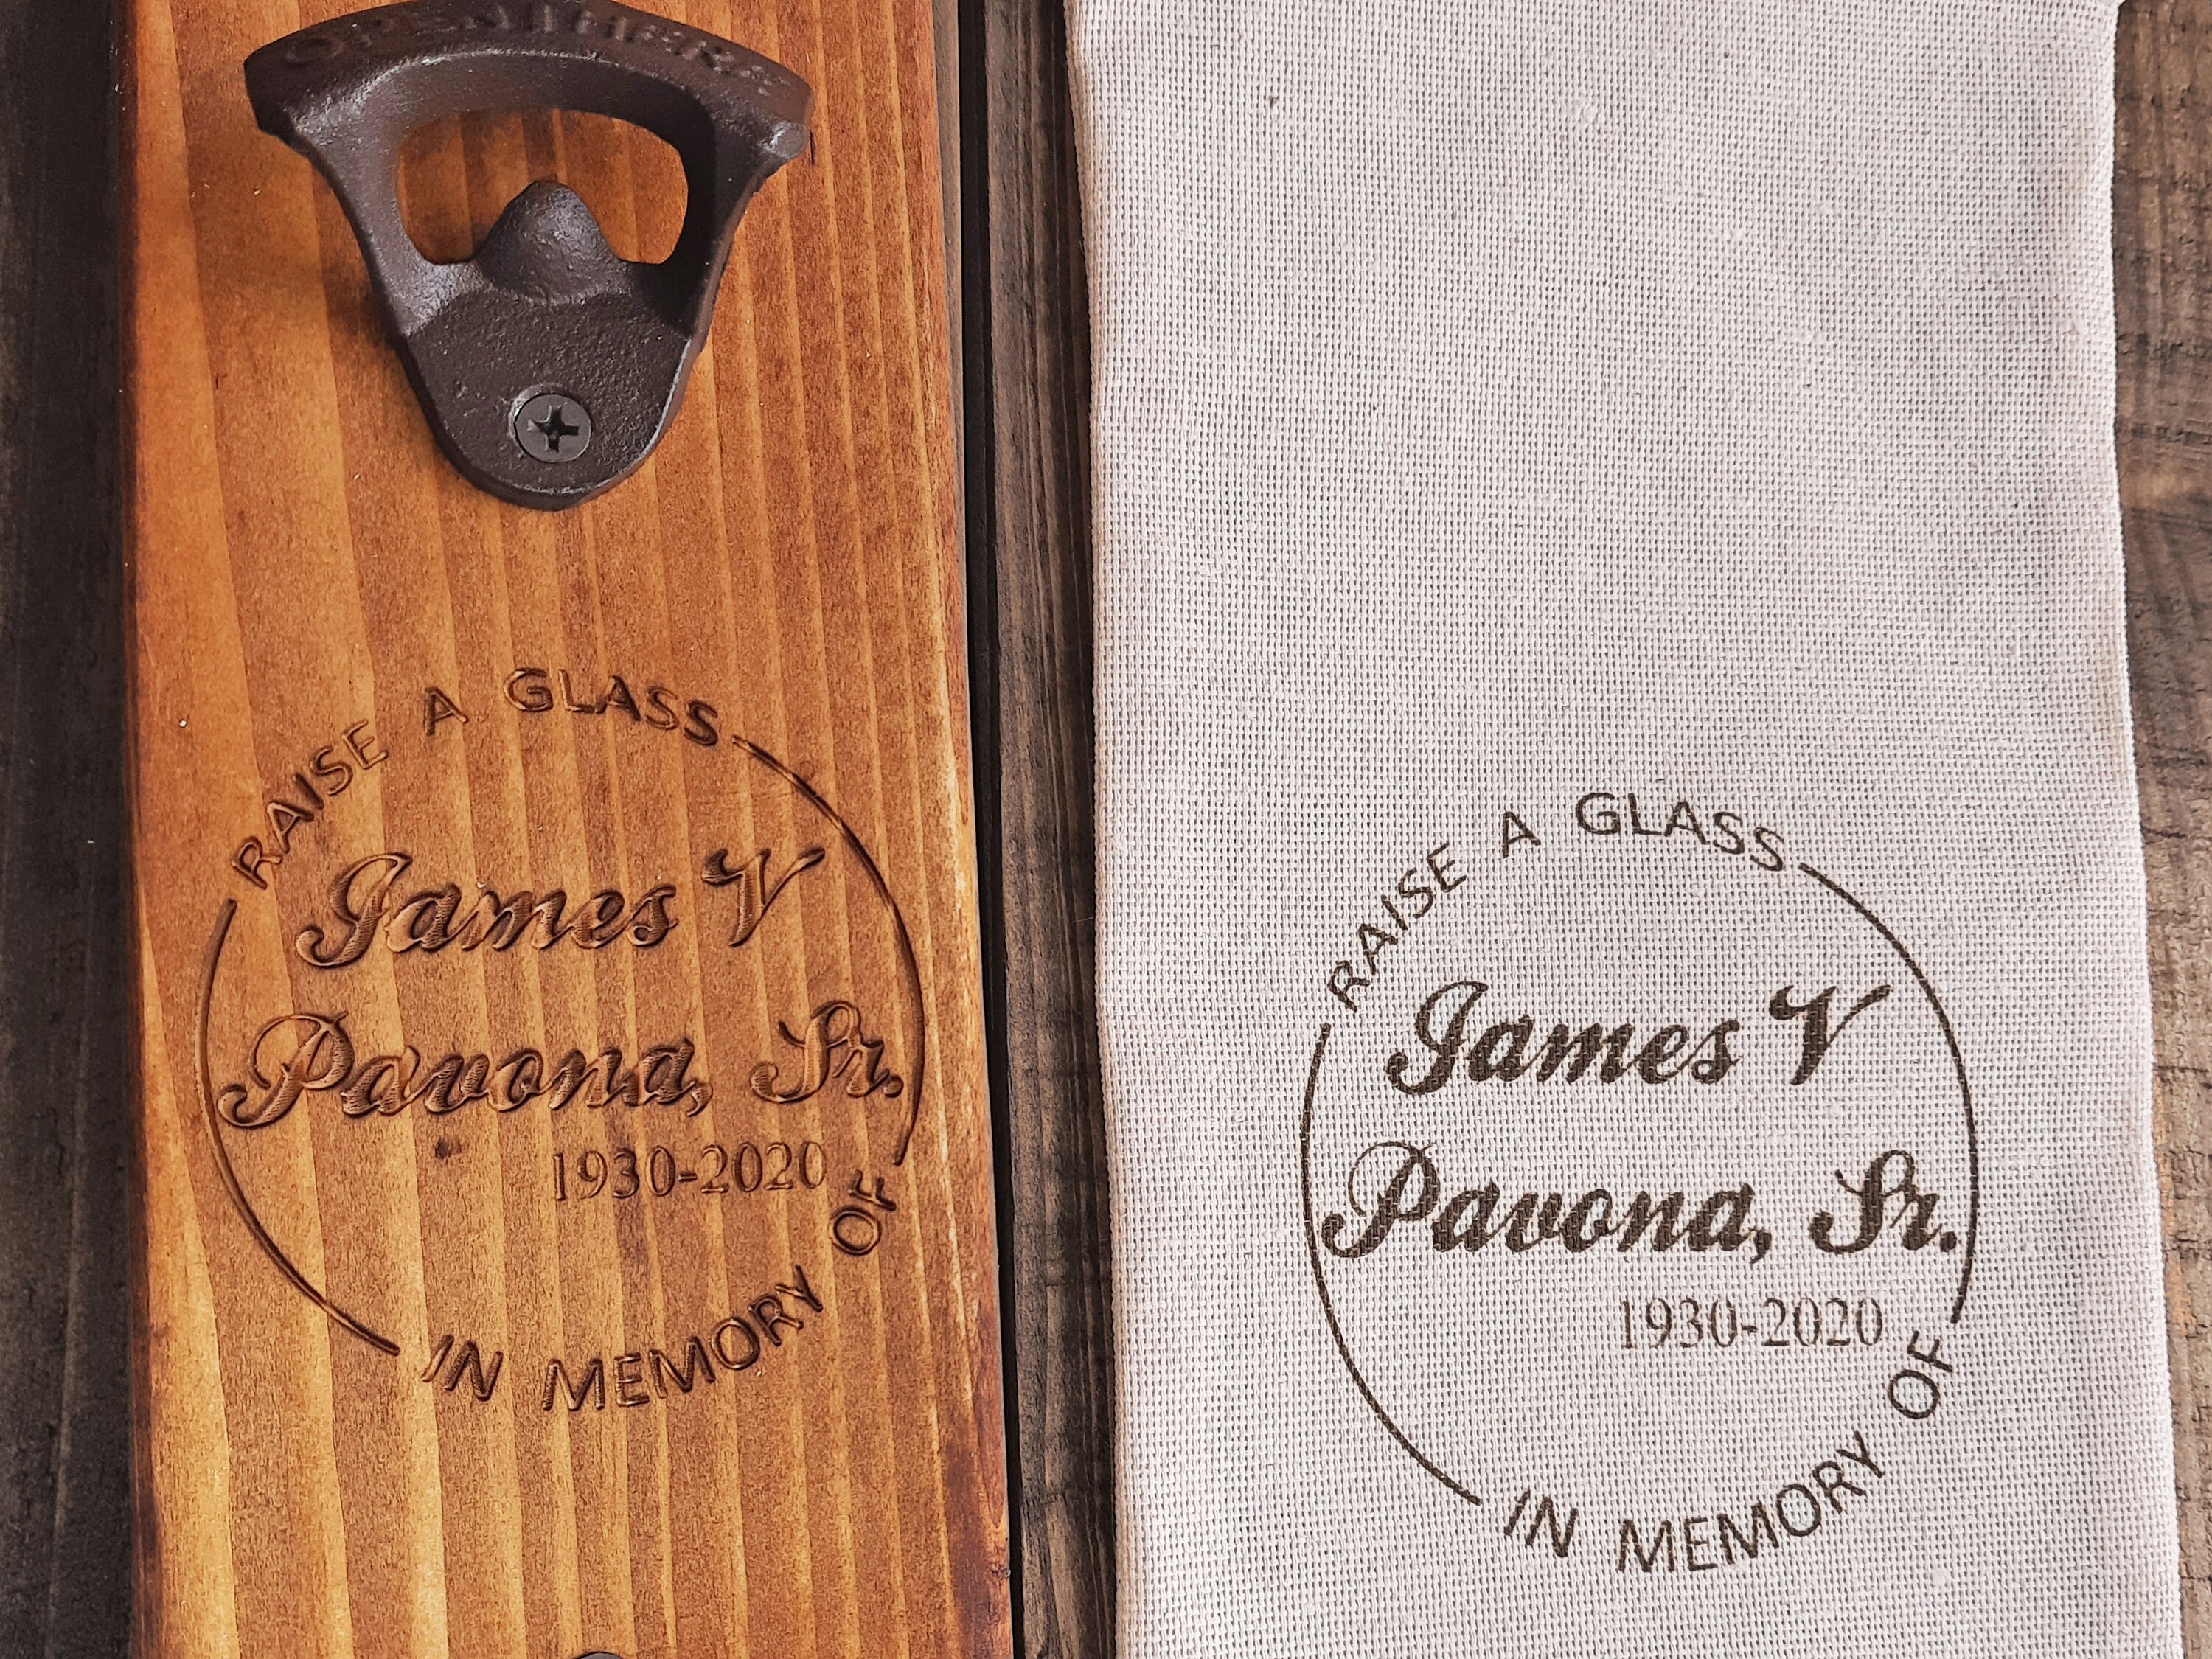 Wall Hanging Bottle Opener/personalized With Name/come in Relax